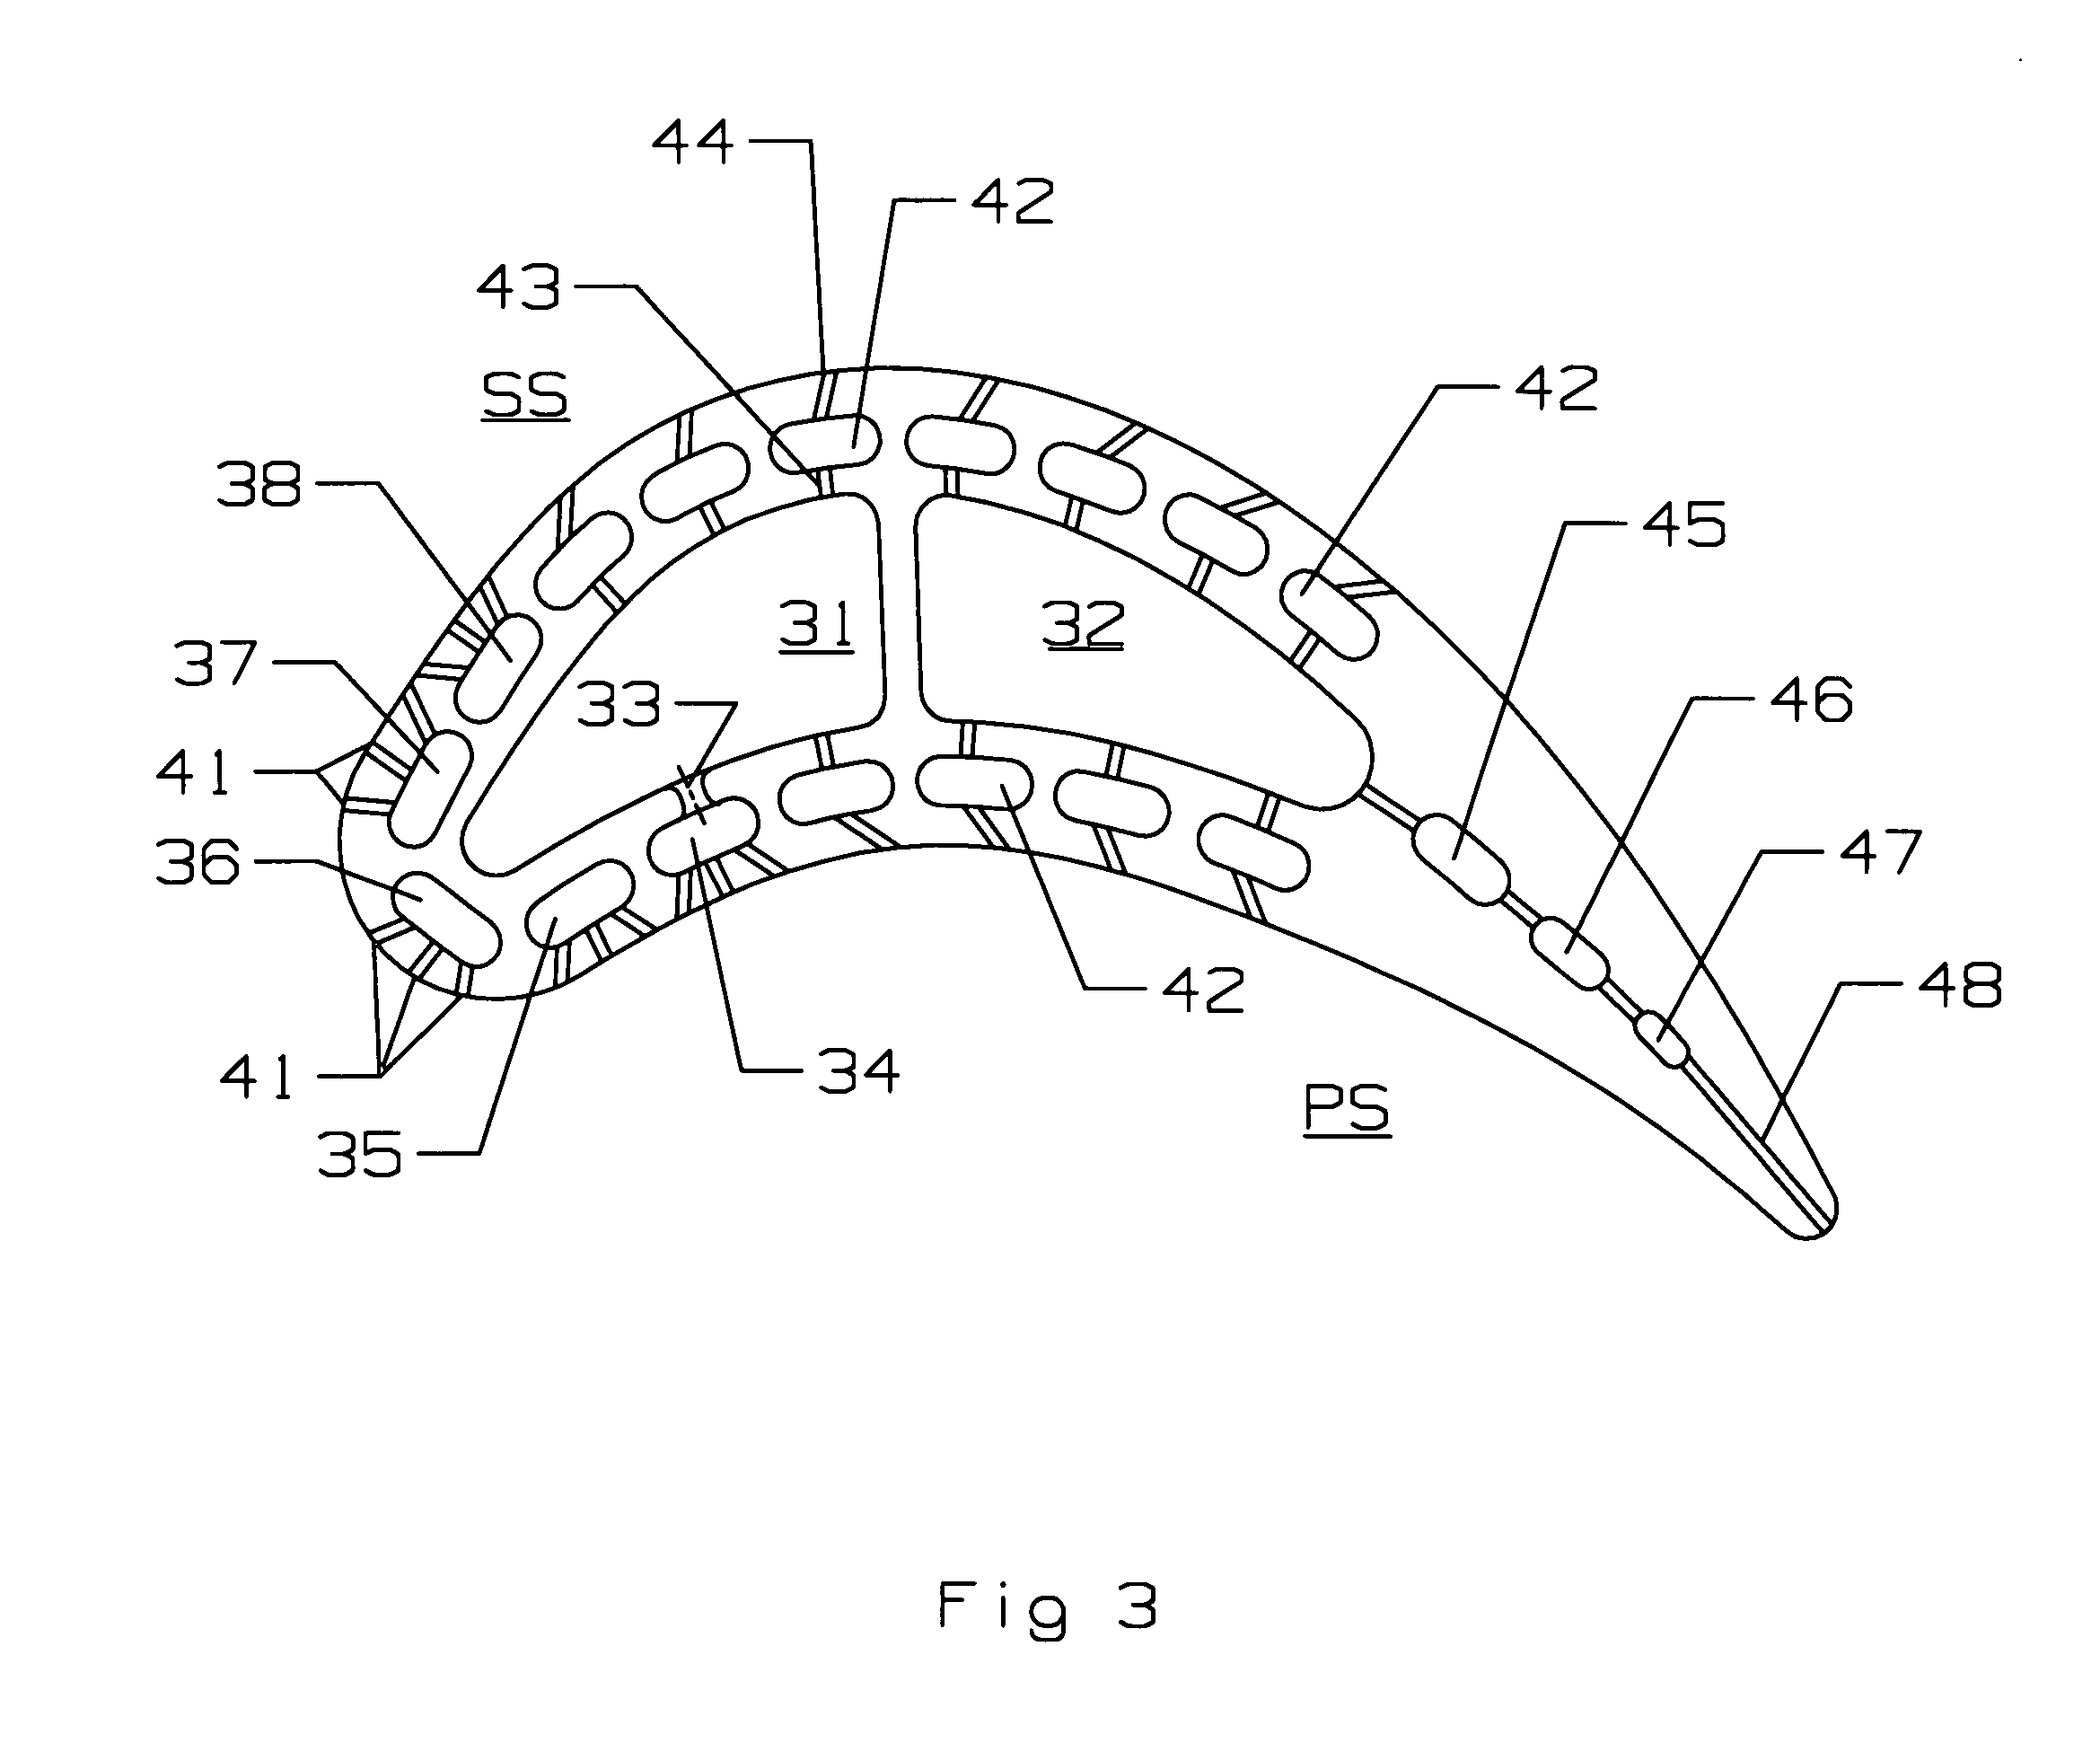 Turbine airfoil with near-wall serpentine cooling